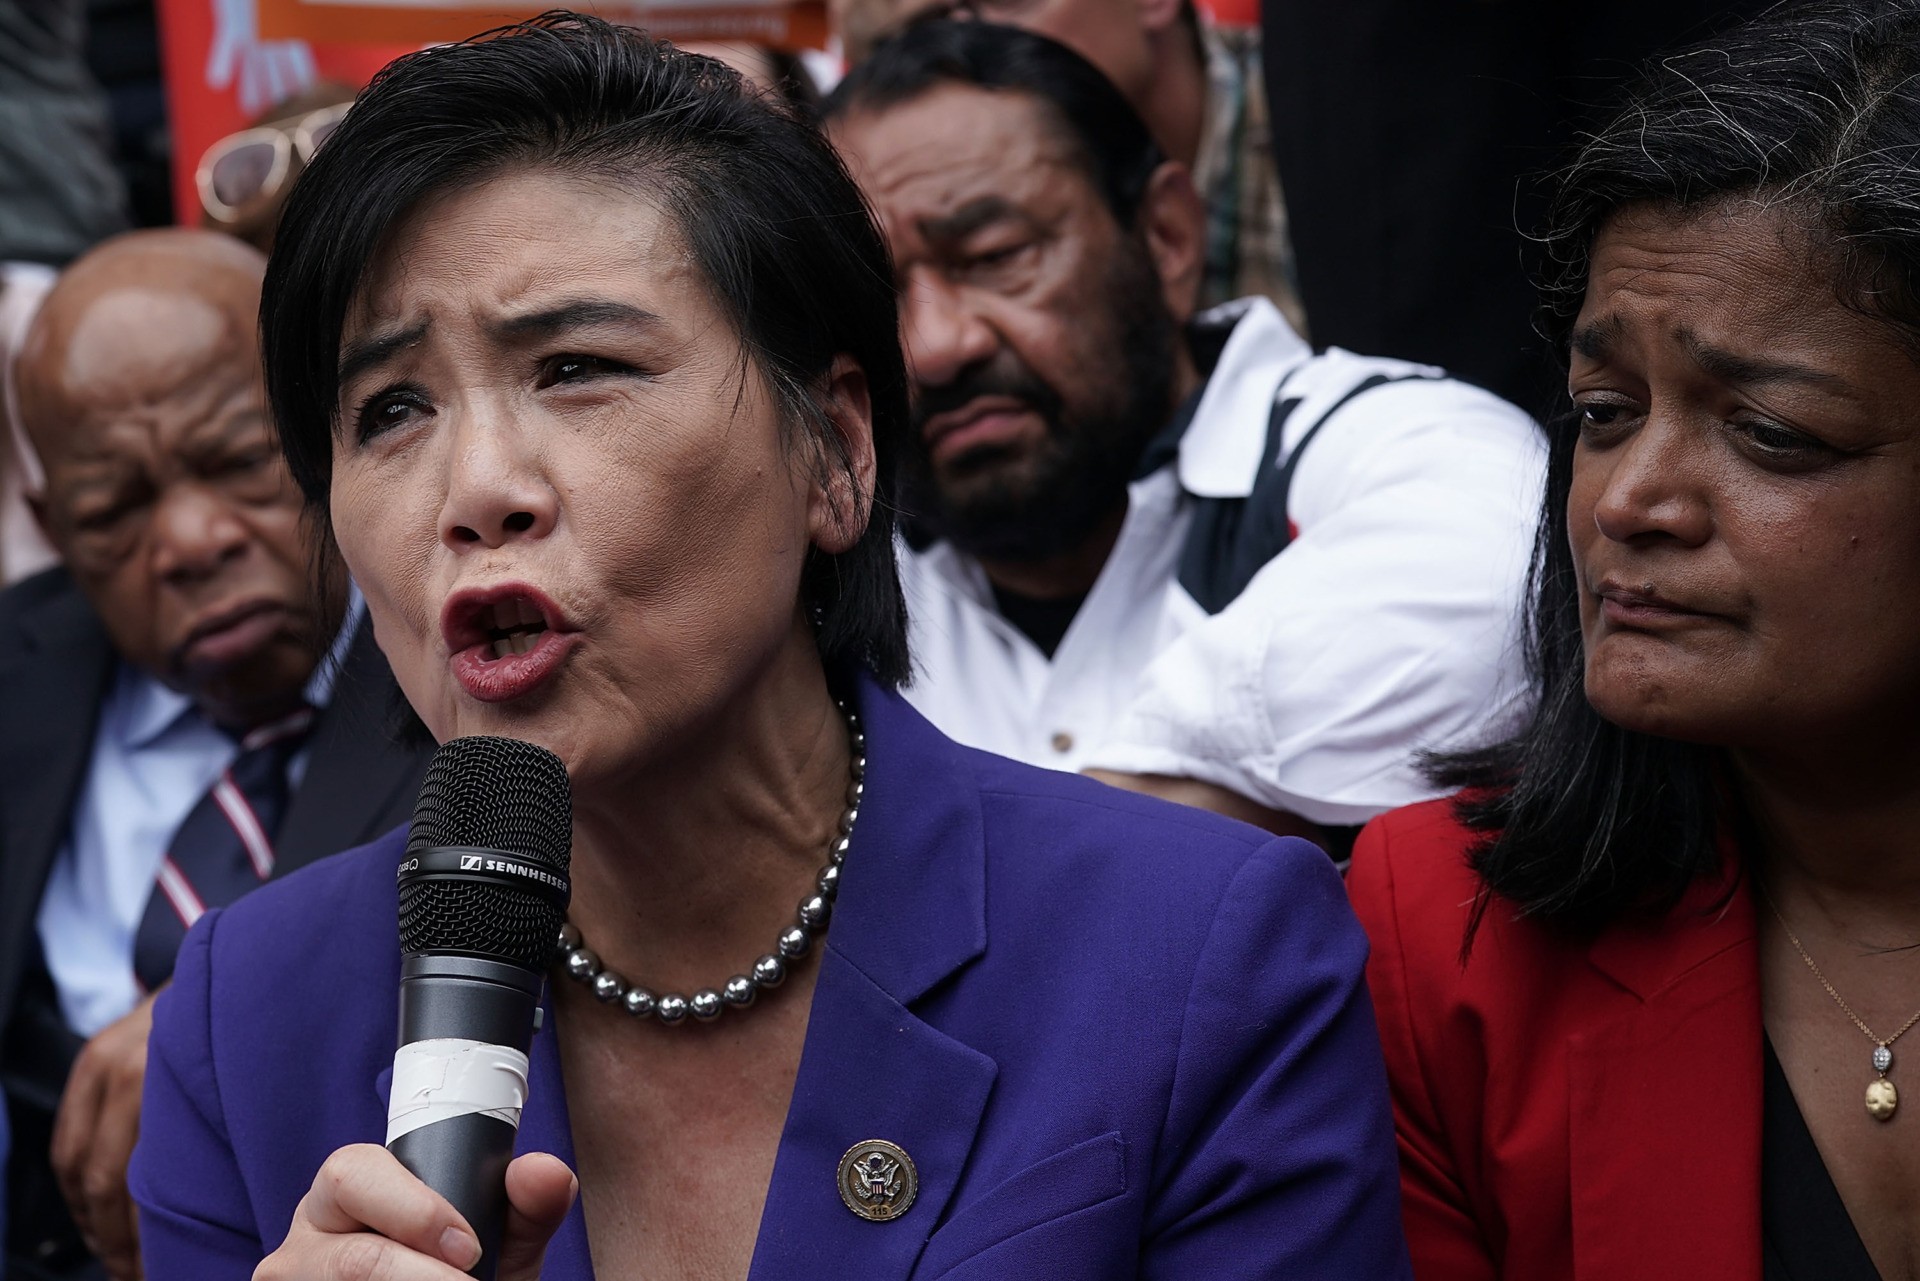 WASHINGTON, DC - JUNE 13: U.S. Rep. Judy Chu (D-CA) (2nd L) speaks as Rep. Pramila Jayapal (D-WA) (R), Rep. John Lewis (D-GA) (L) and Rep. Al Green (D-TX) (3rd L) listen during a protest outside the headquarters of U.S. Customs and Border Protection during a protest June 13, 2018 in Washington, DC. Democratic congressional members joined actives to protest "the Trump administration's policy to separate children from their parents at the border." (Photo by Alex Wong/Getty Images)